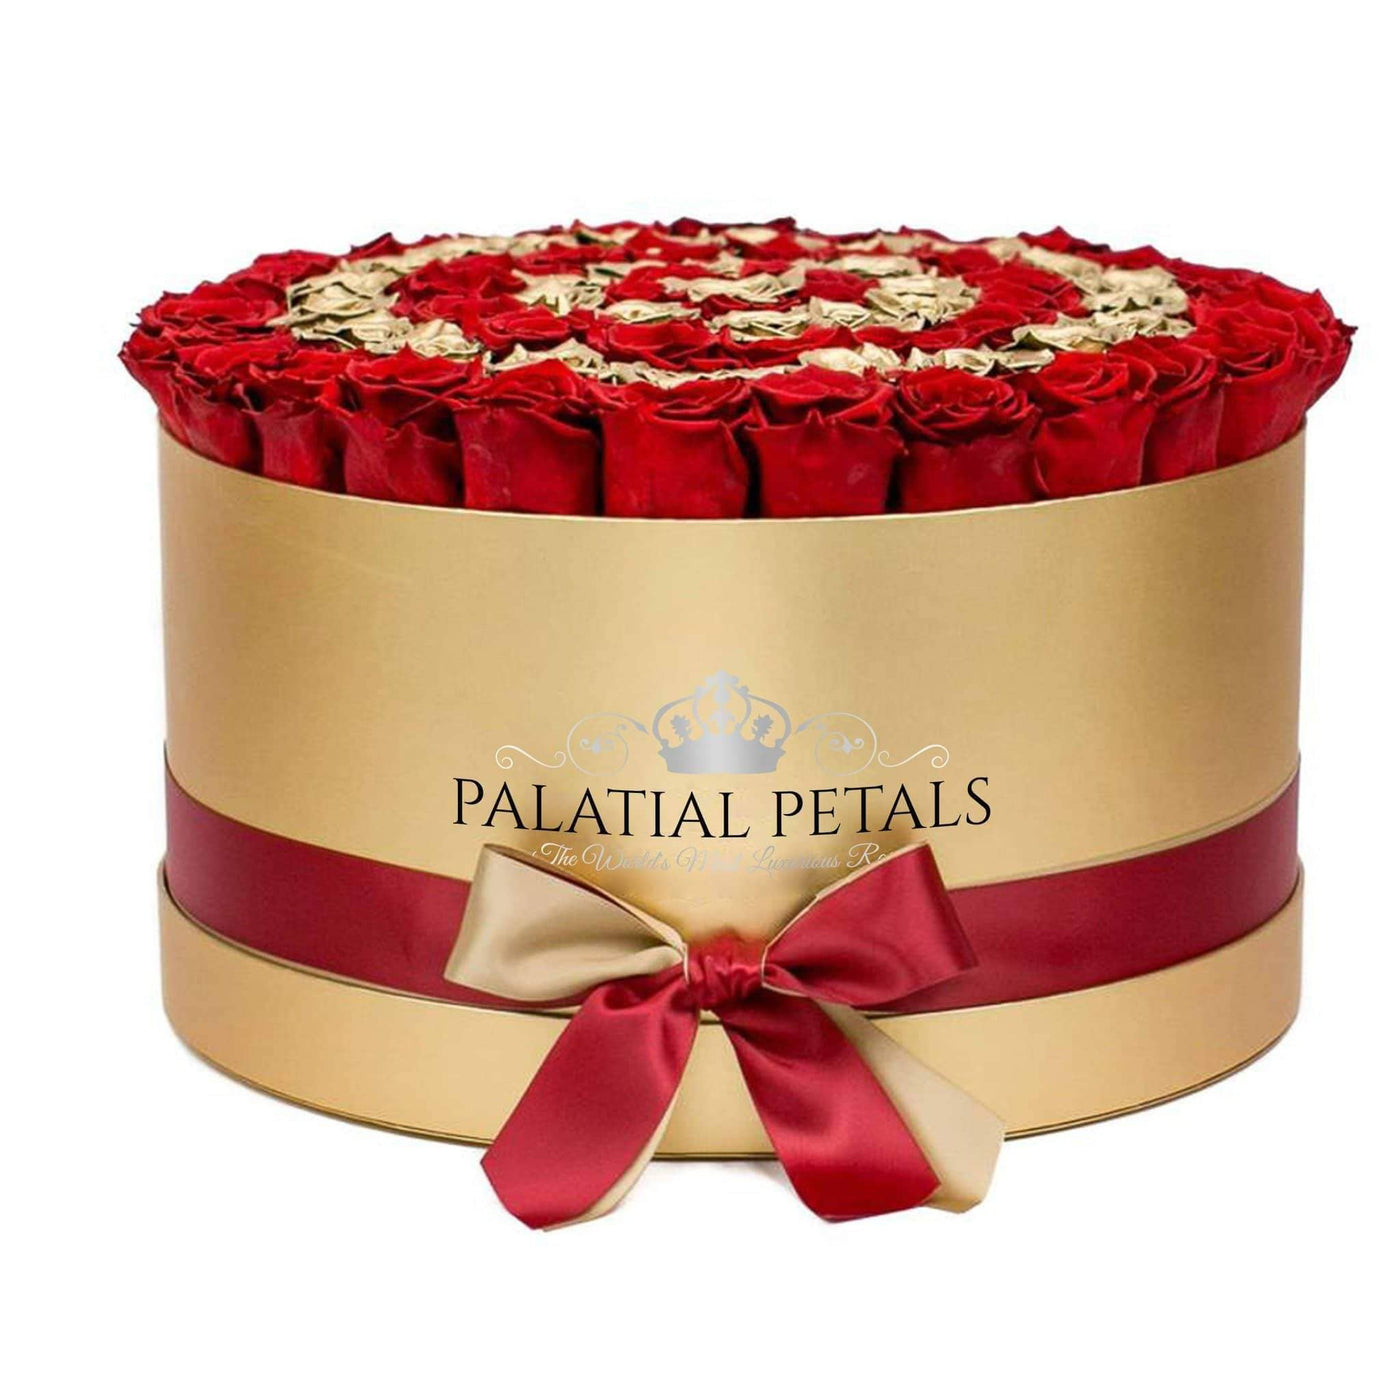 Red & 24k Gold Roses That Last A Year (Target) - Deluxe Rose Box